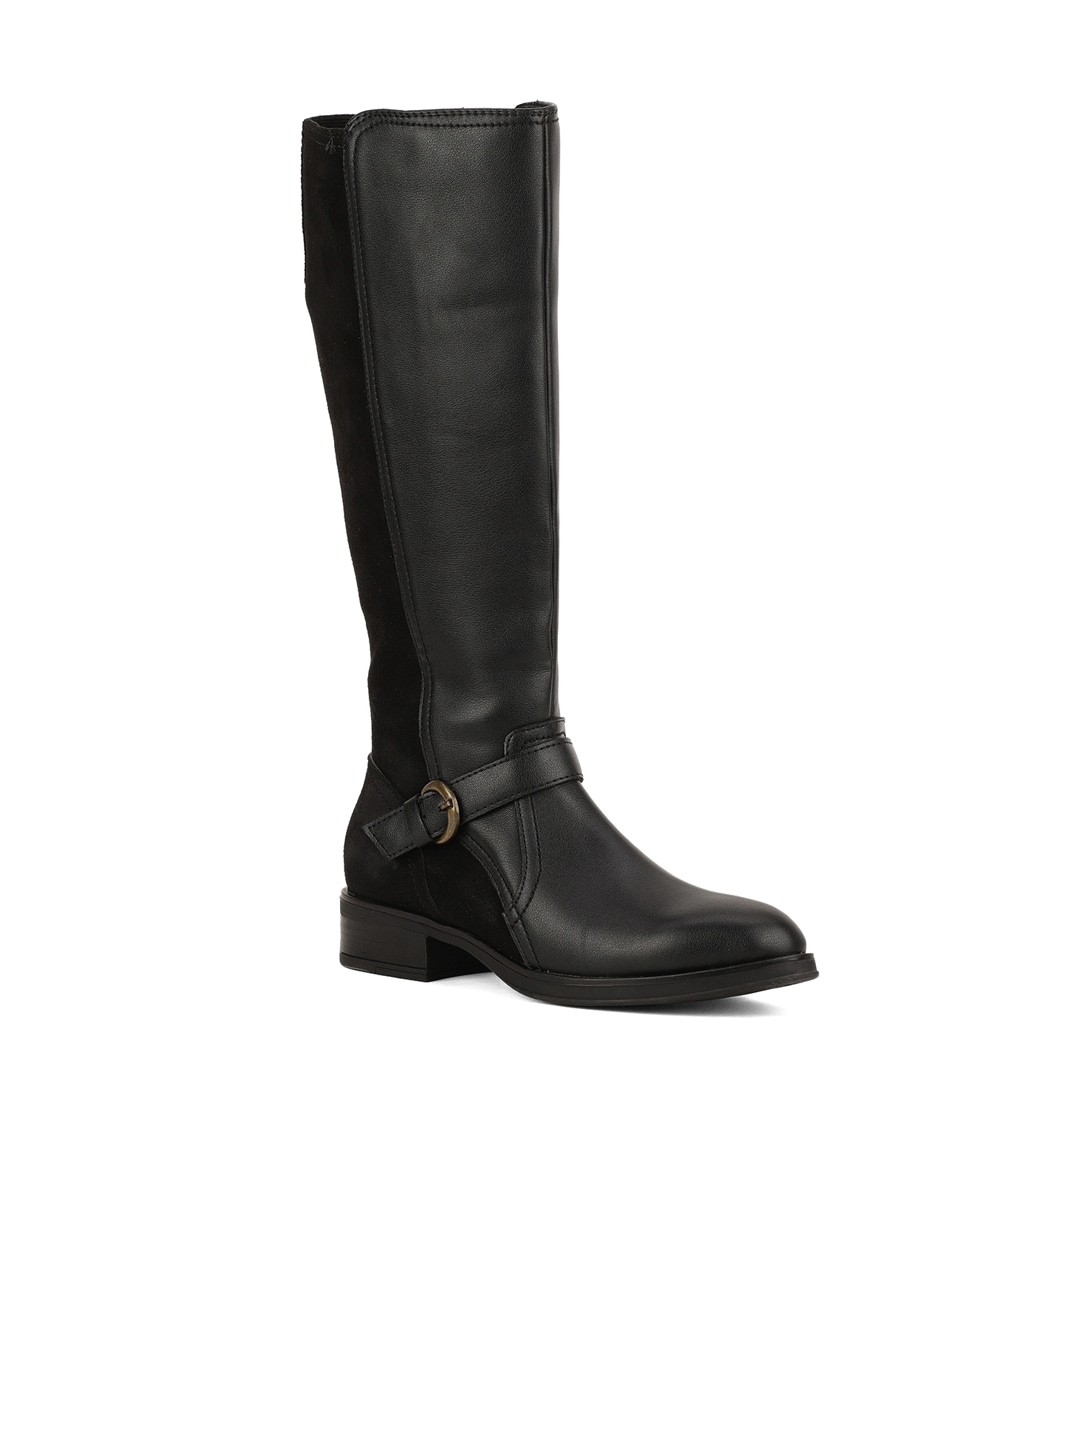 Bruno Manetti Women Black Leather High-Top Flat Boots Price in India